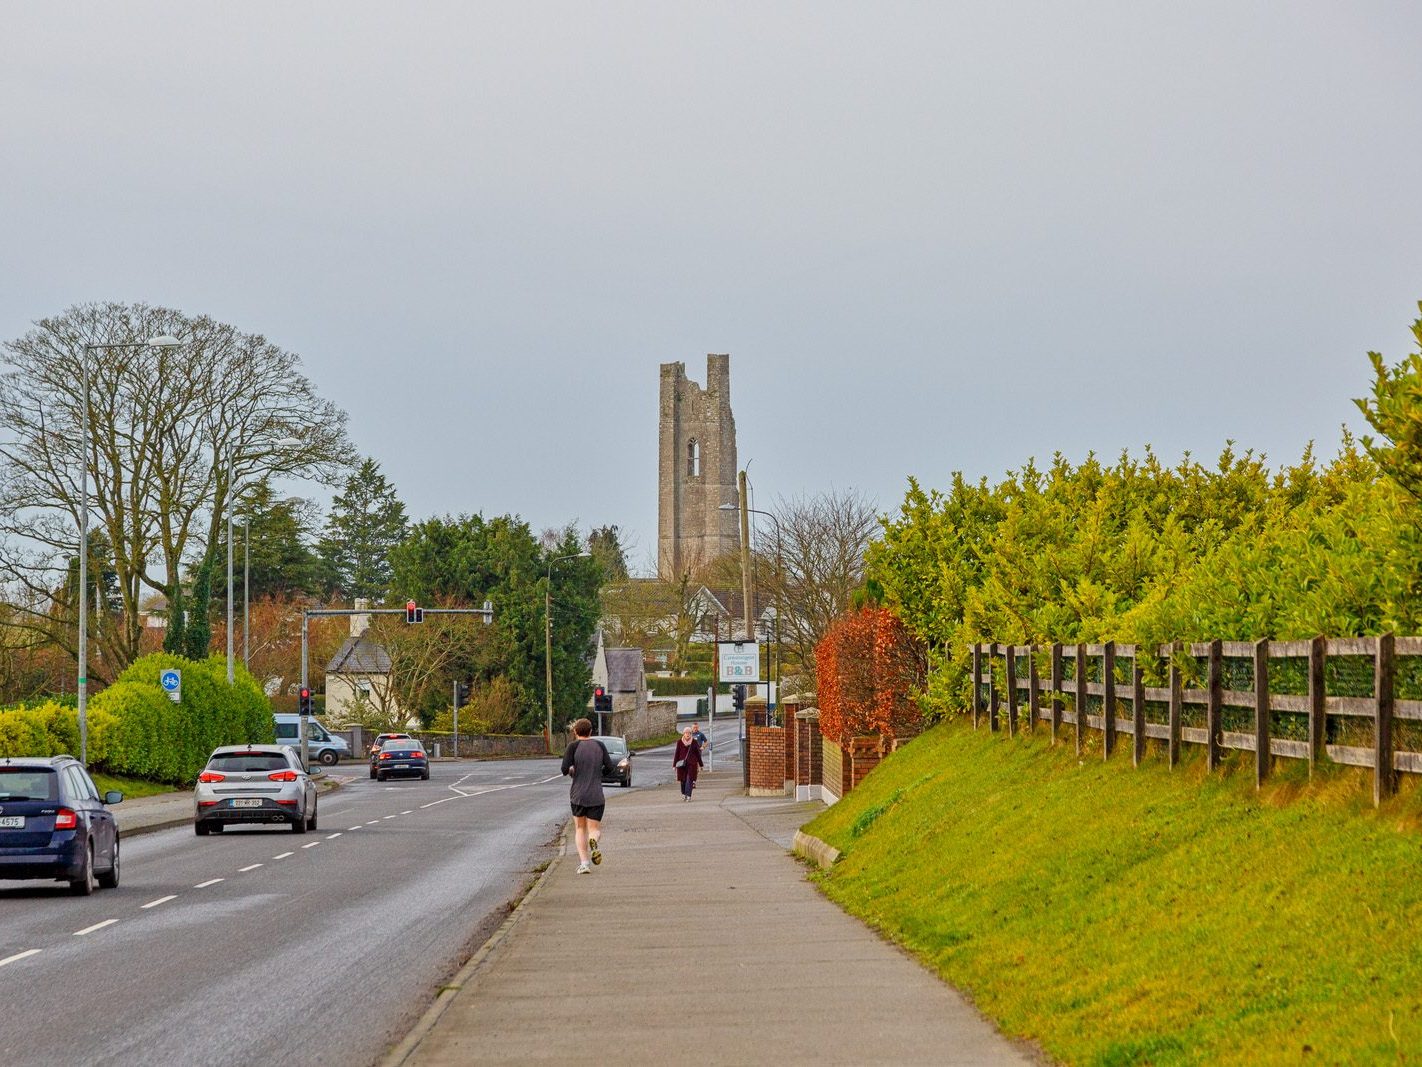 THE YELLOW STEEPLE DOMINATES THE TOWN OF TRIM [ALSO KNOWN AS ST MARYS ABBEY]-226755-1